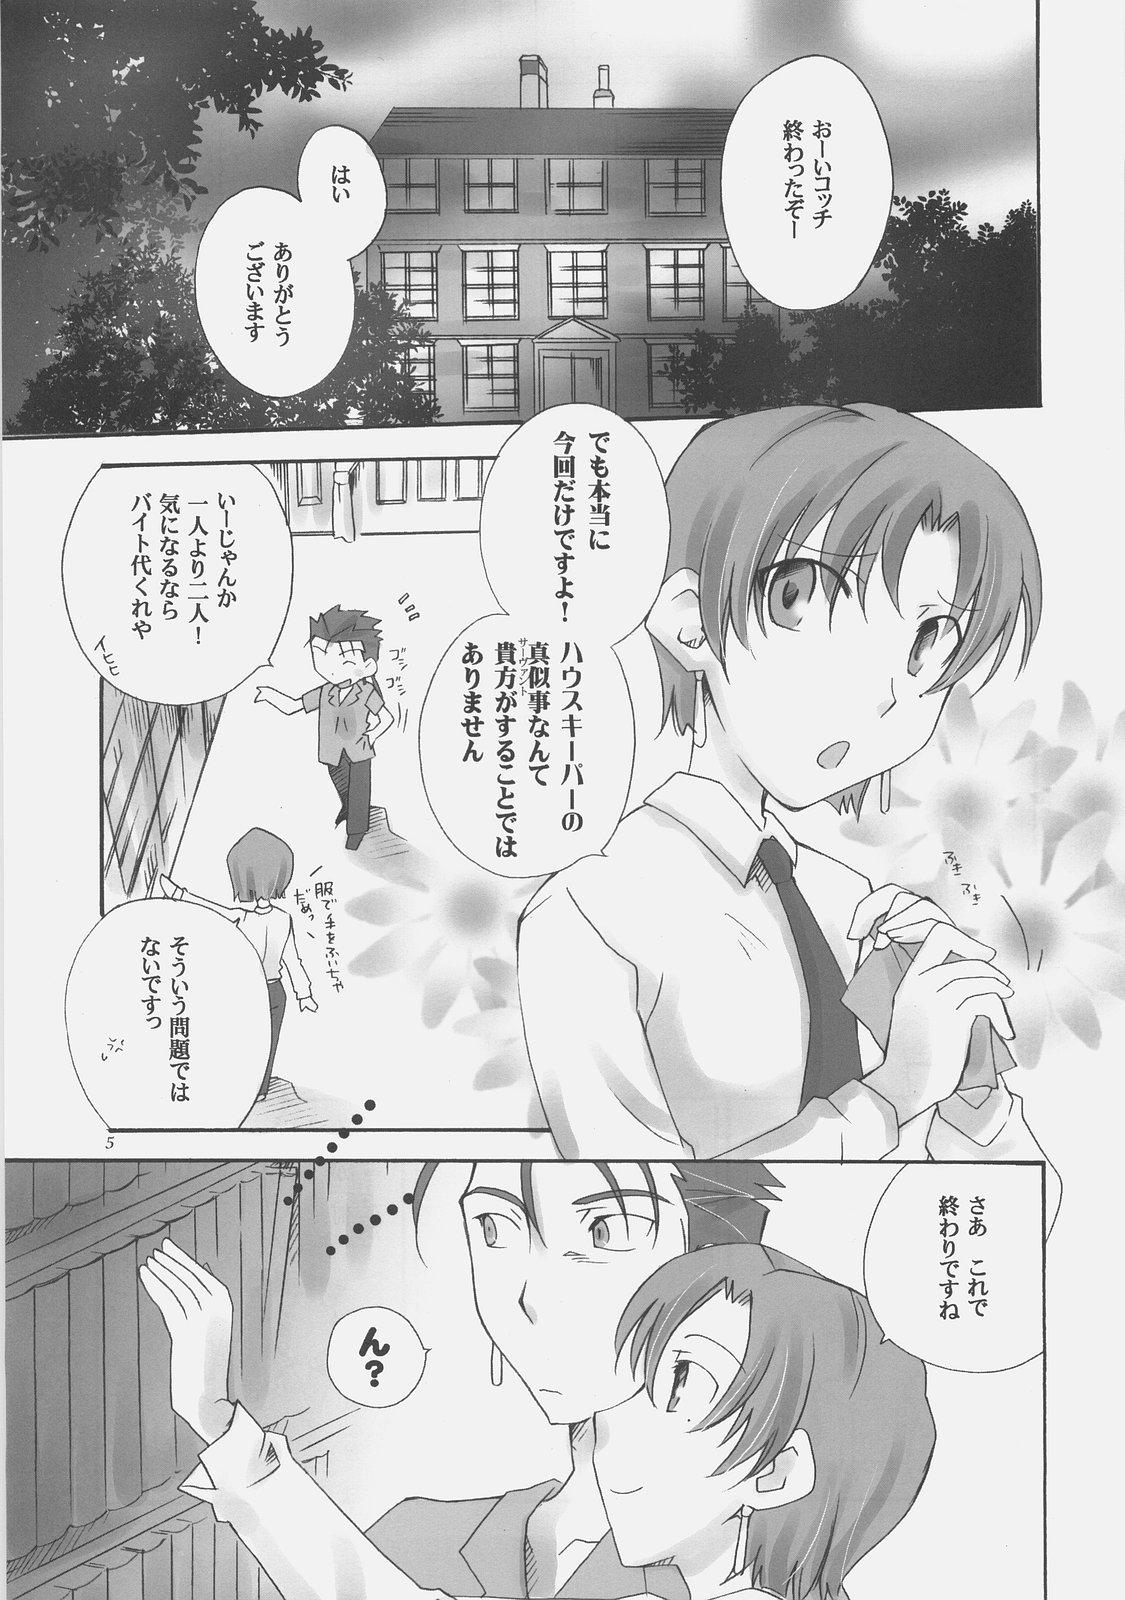 Dykes Secret Mission - Fate hollow ataraxia Hot Brunette - Page 3